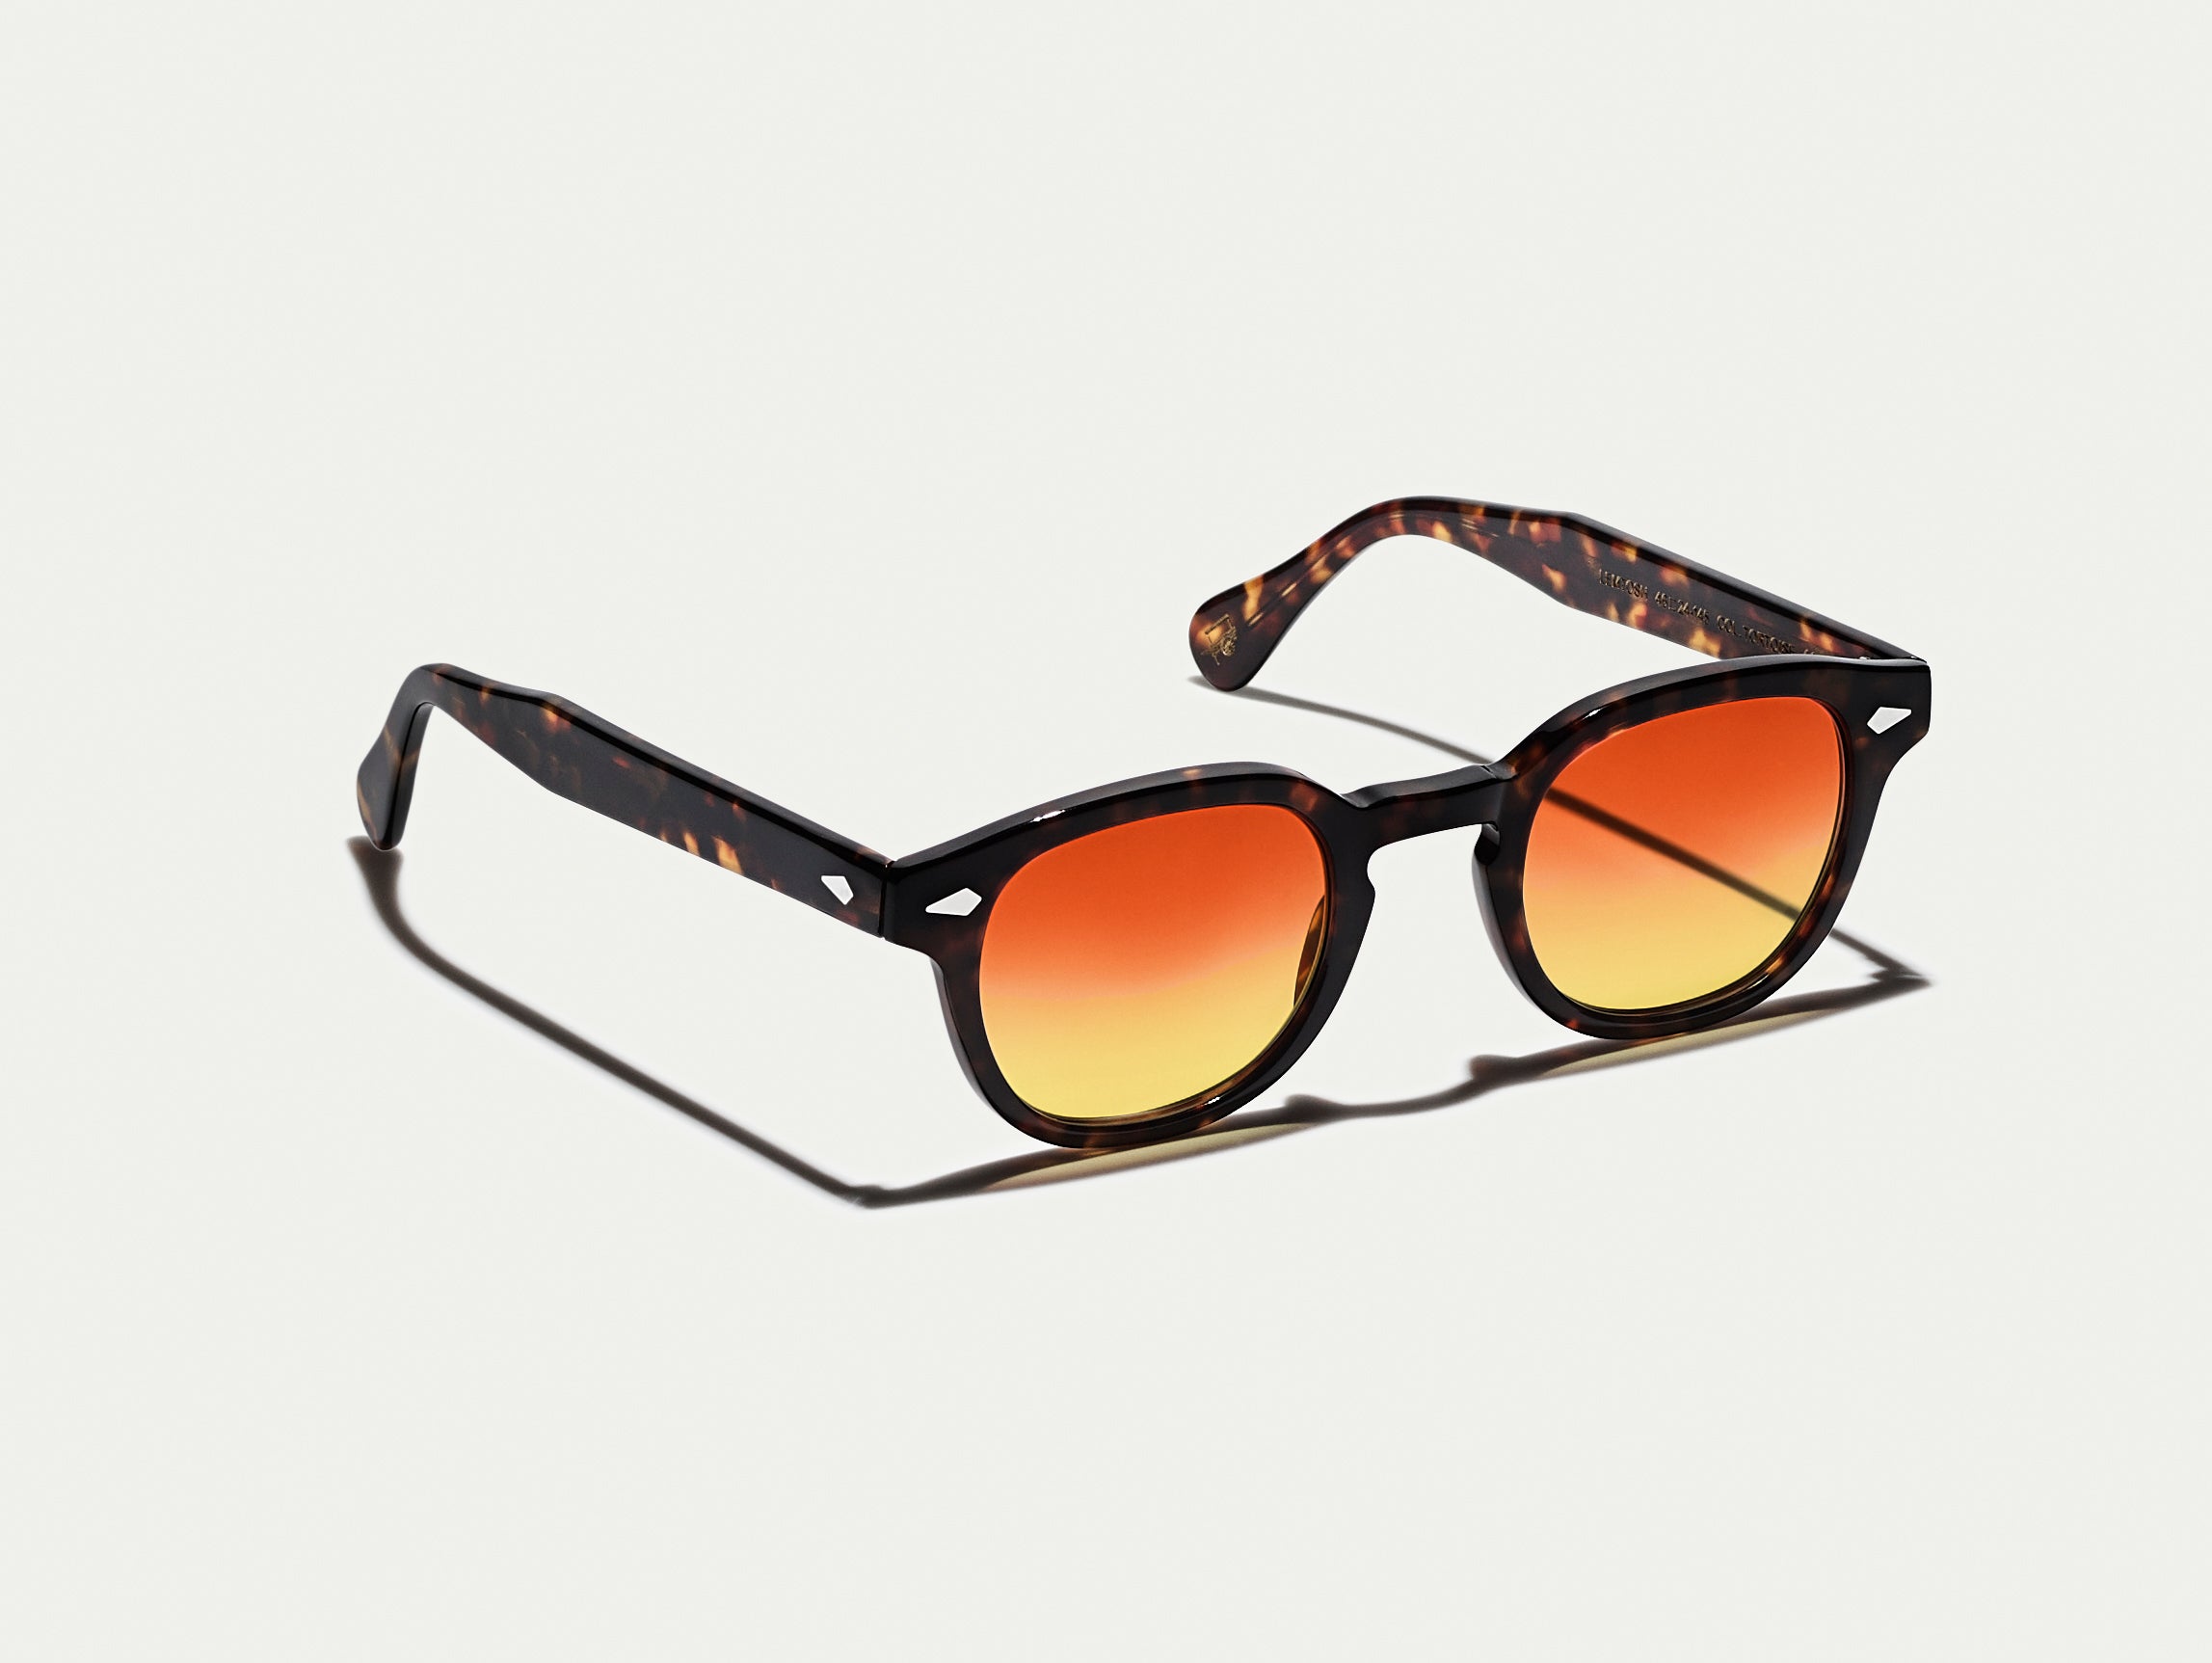 #color_candy corn | The LEMTOSH Tortoise with Candy Corn Tinted Lenses